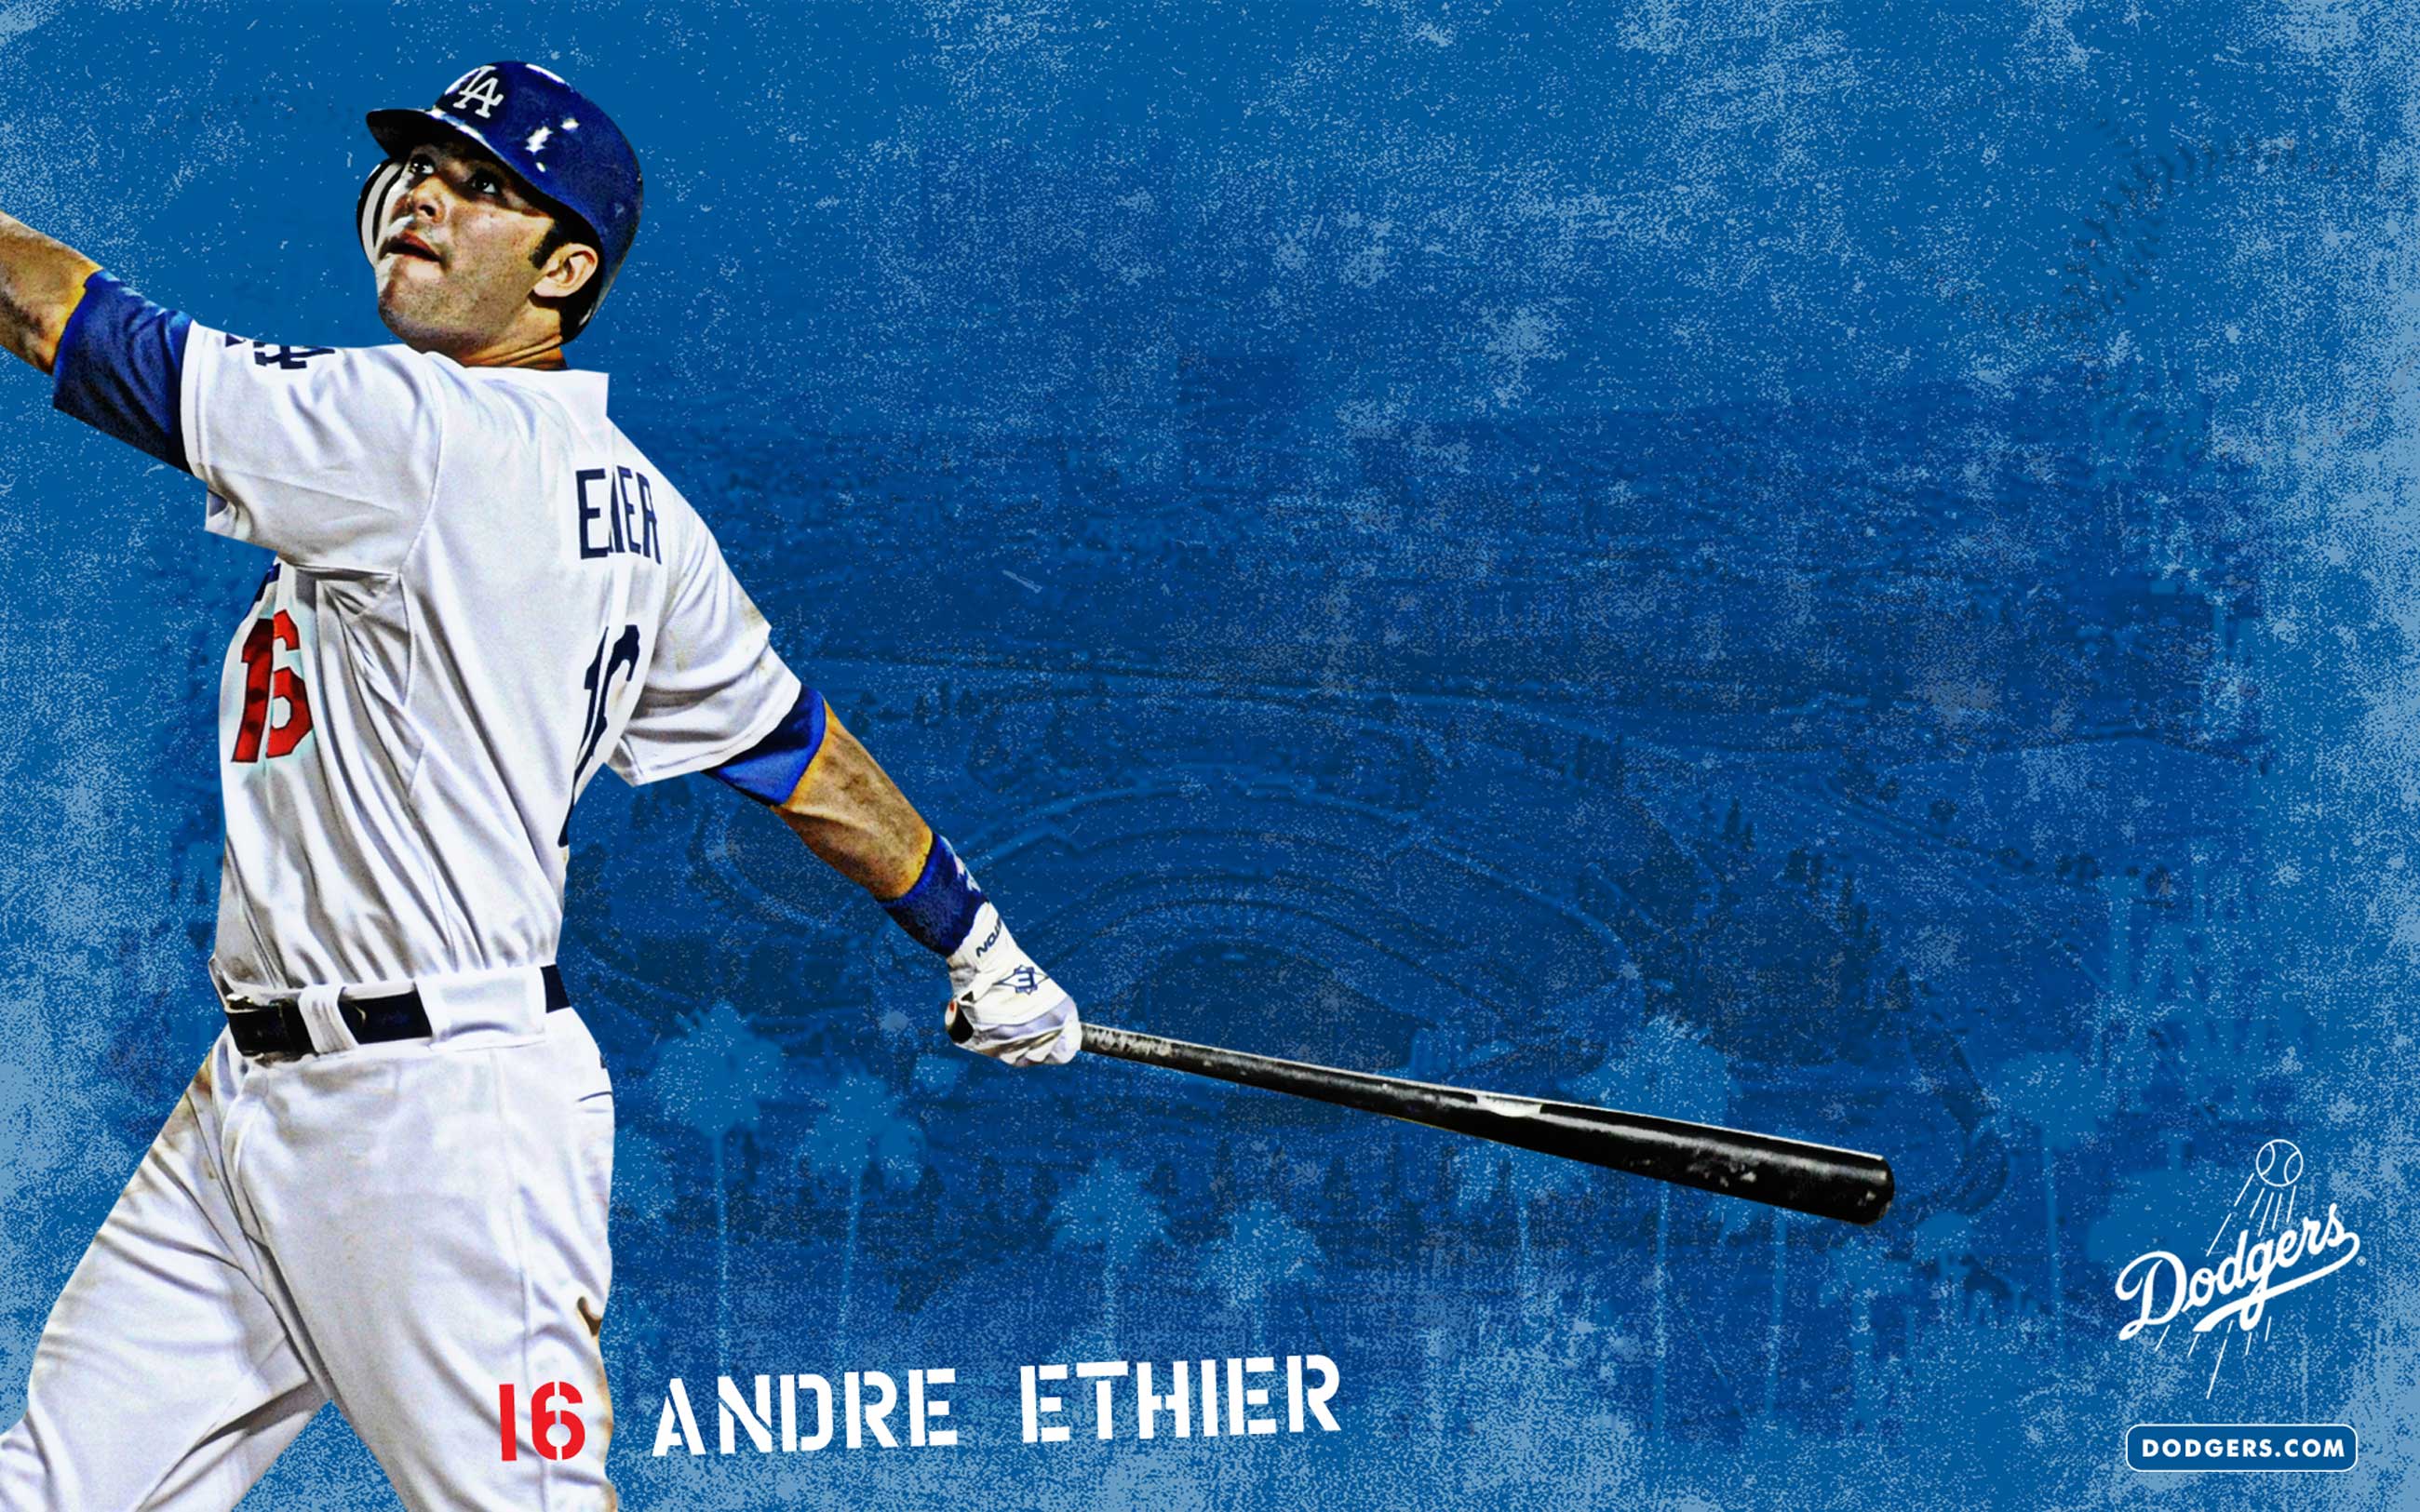  Angeles Dodgers wallpapers Los Angeles Dodgers background   Page 3